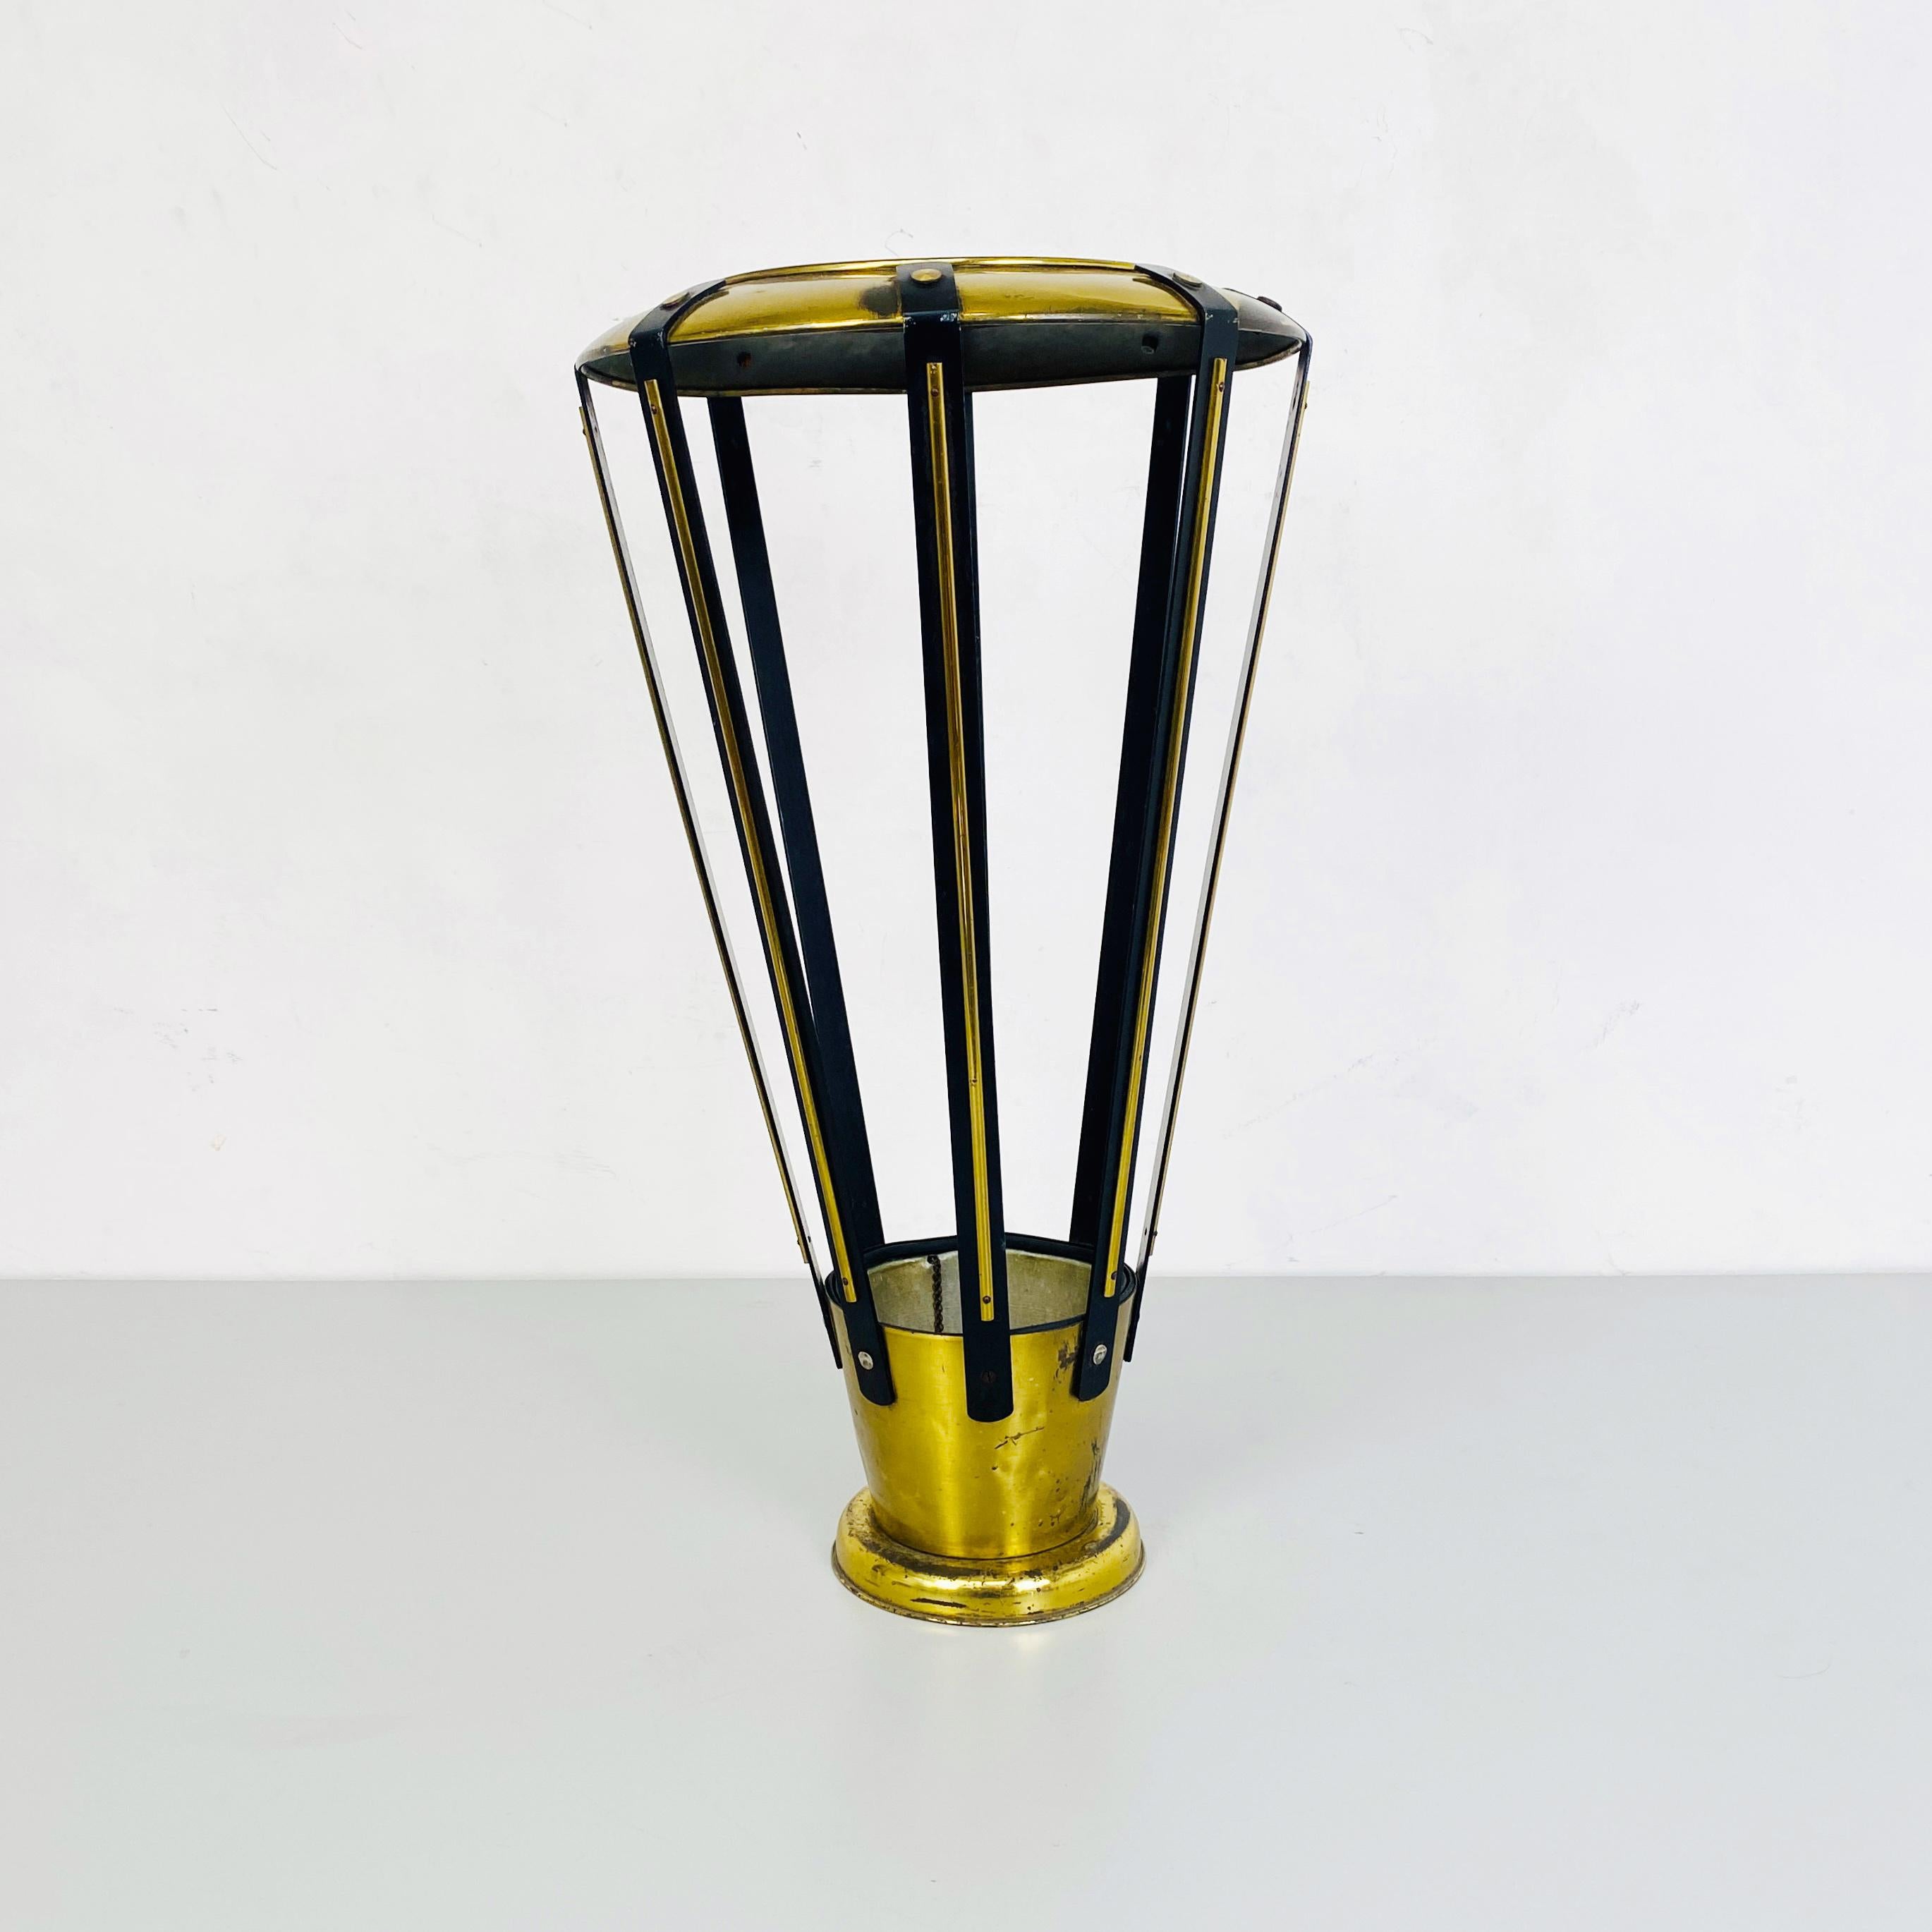 Brass umbrella stand, 1950s
Umbrella stand with brass structure and black metal details.

Brass brass and other brass! This can be the perfect touch of gold that every guess of your house can see outside your door or inside
All the other umbrella